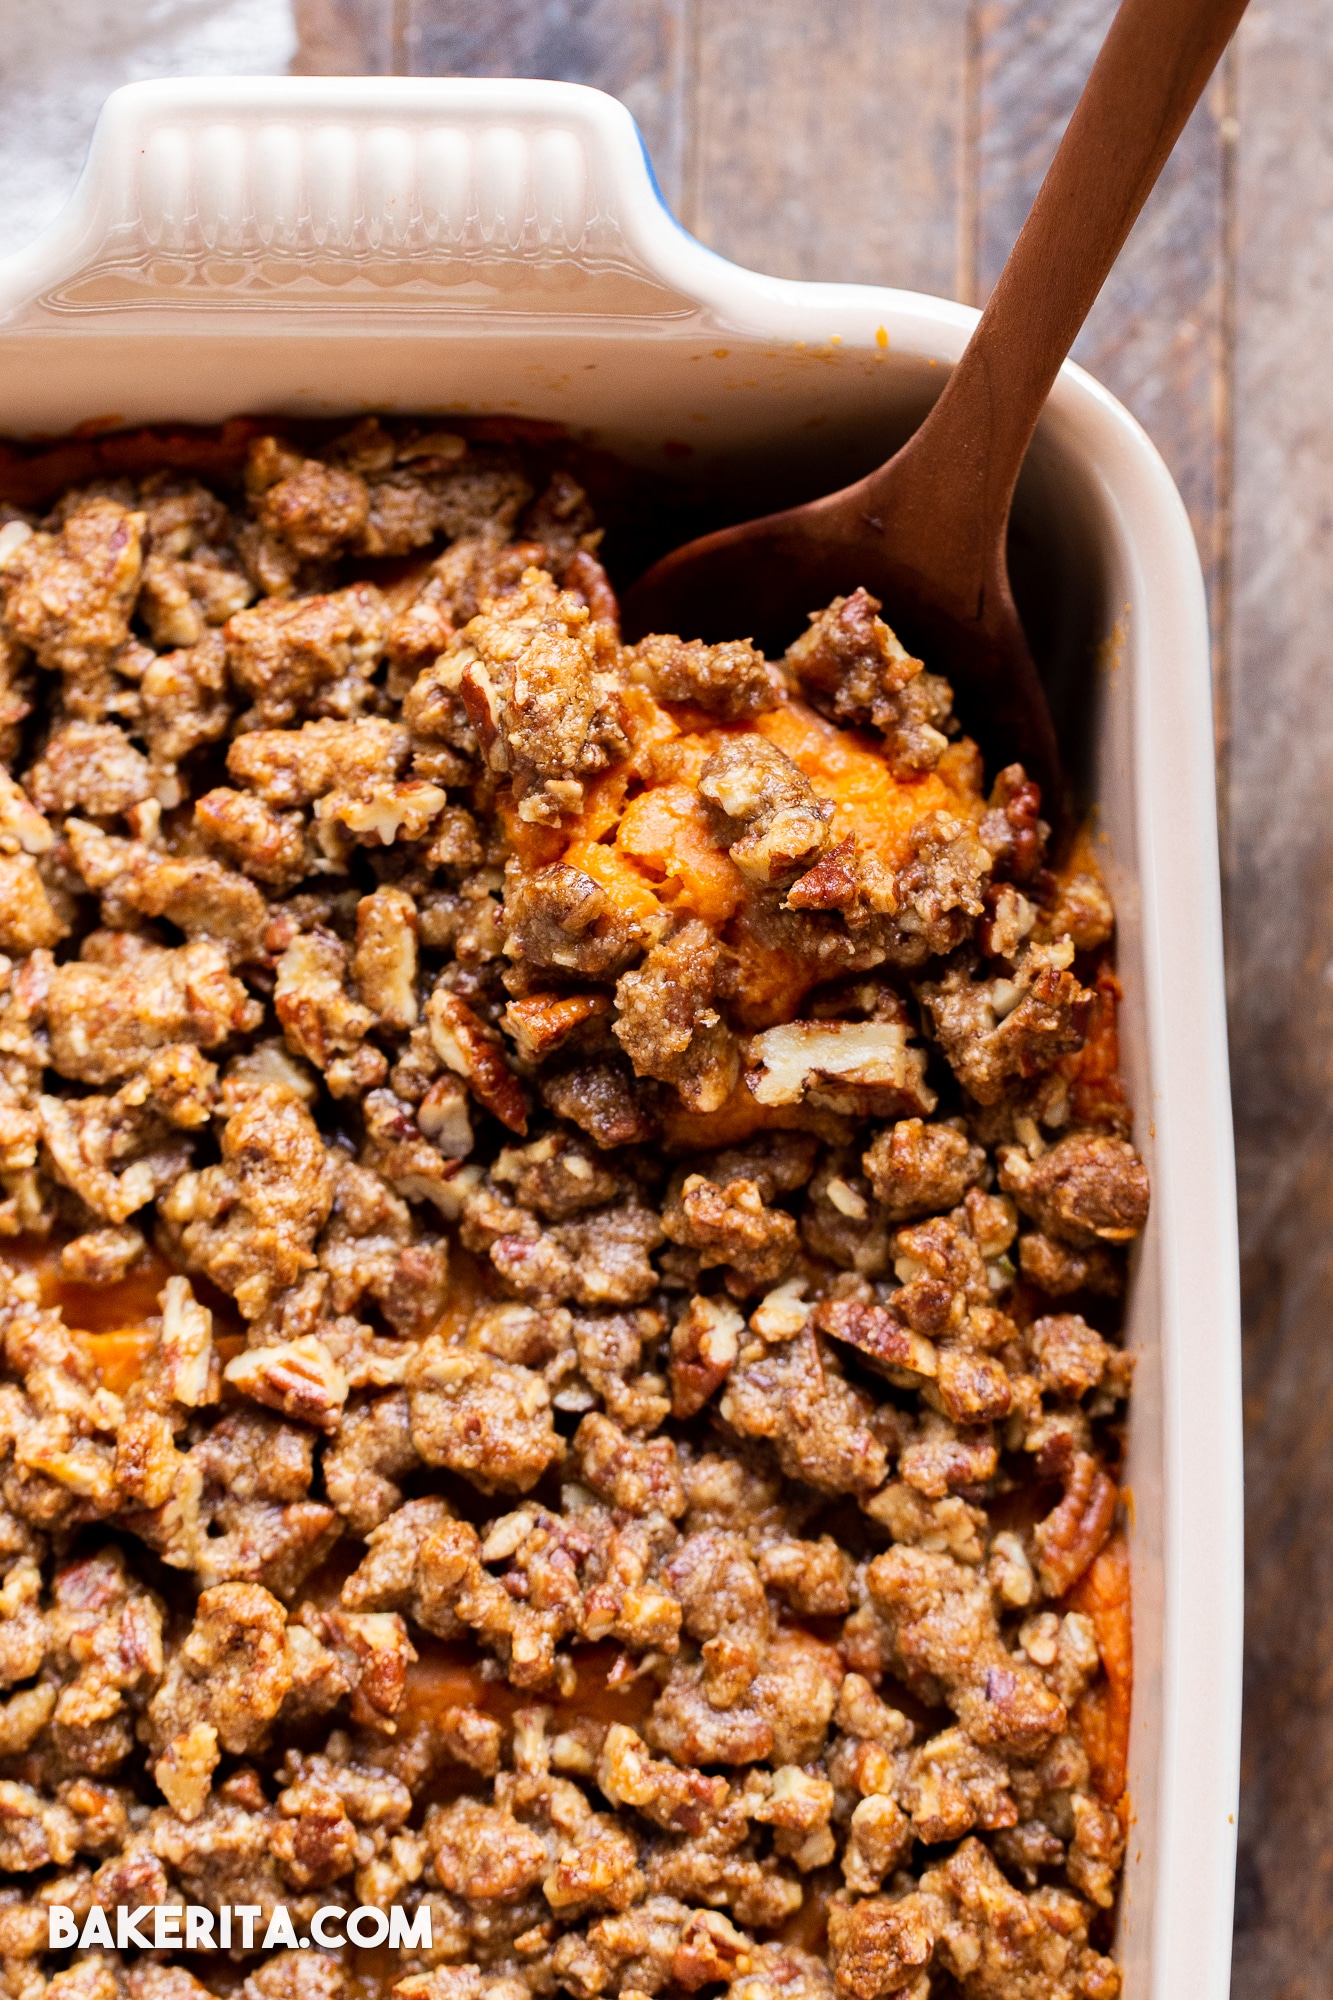 This Vegan Sweet Potato Casserole with Gluten-Free Pecan Crumble recipe is the best sweet potato casserole ever! It's made with fresh yams and coconut sugar for subtle sweetness that pairs perfectly with the rest of your holiday meal. With a crispy gluten-free pecan crumble topping, you'll definitely be serving yourself seconds. It's easy to make the day of, or can be prepared in advance for an easy make-ahead holiday side dish.